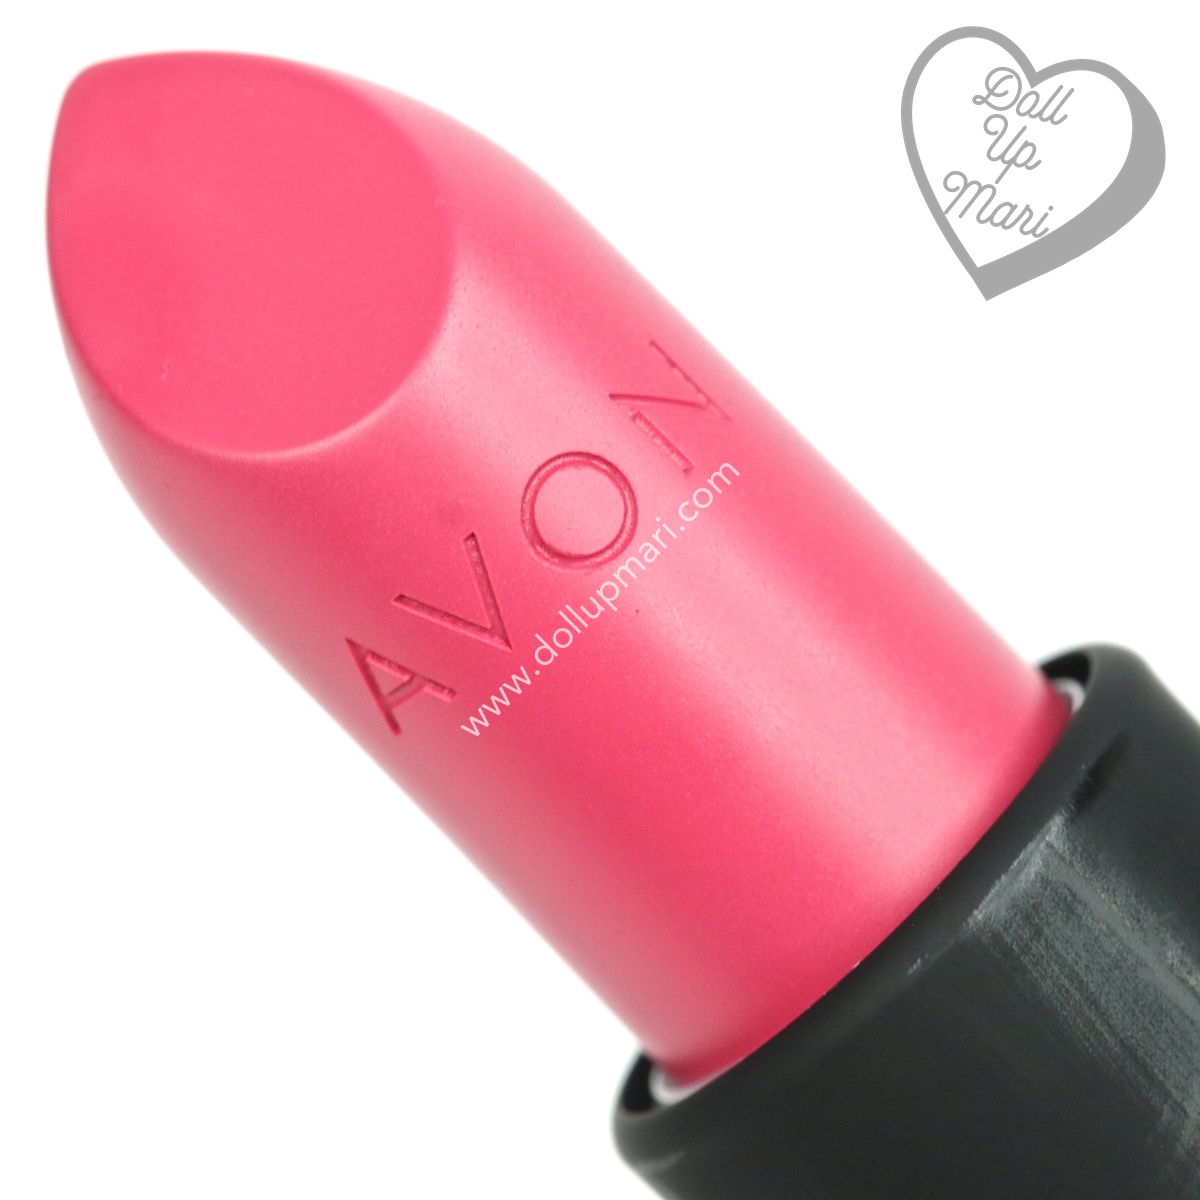 Tube zoom in of Adoring Love shade of AVON Perfectly Matte Lipstick